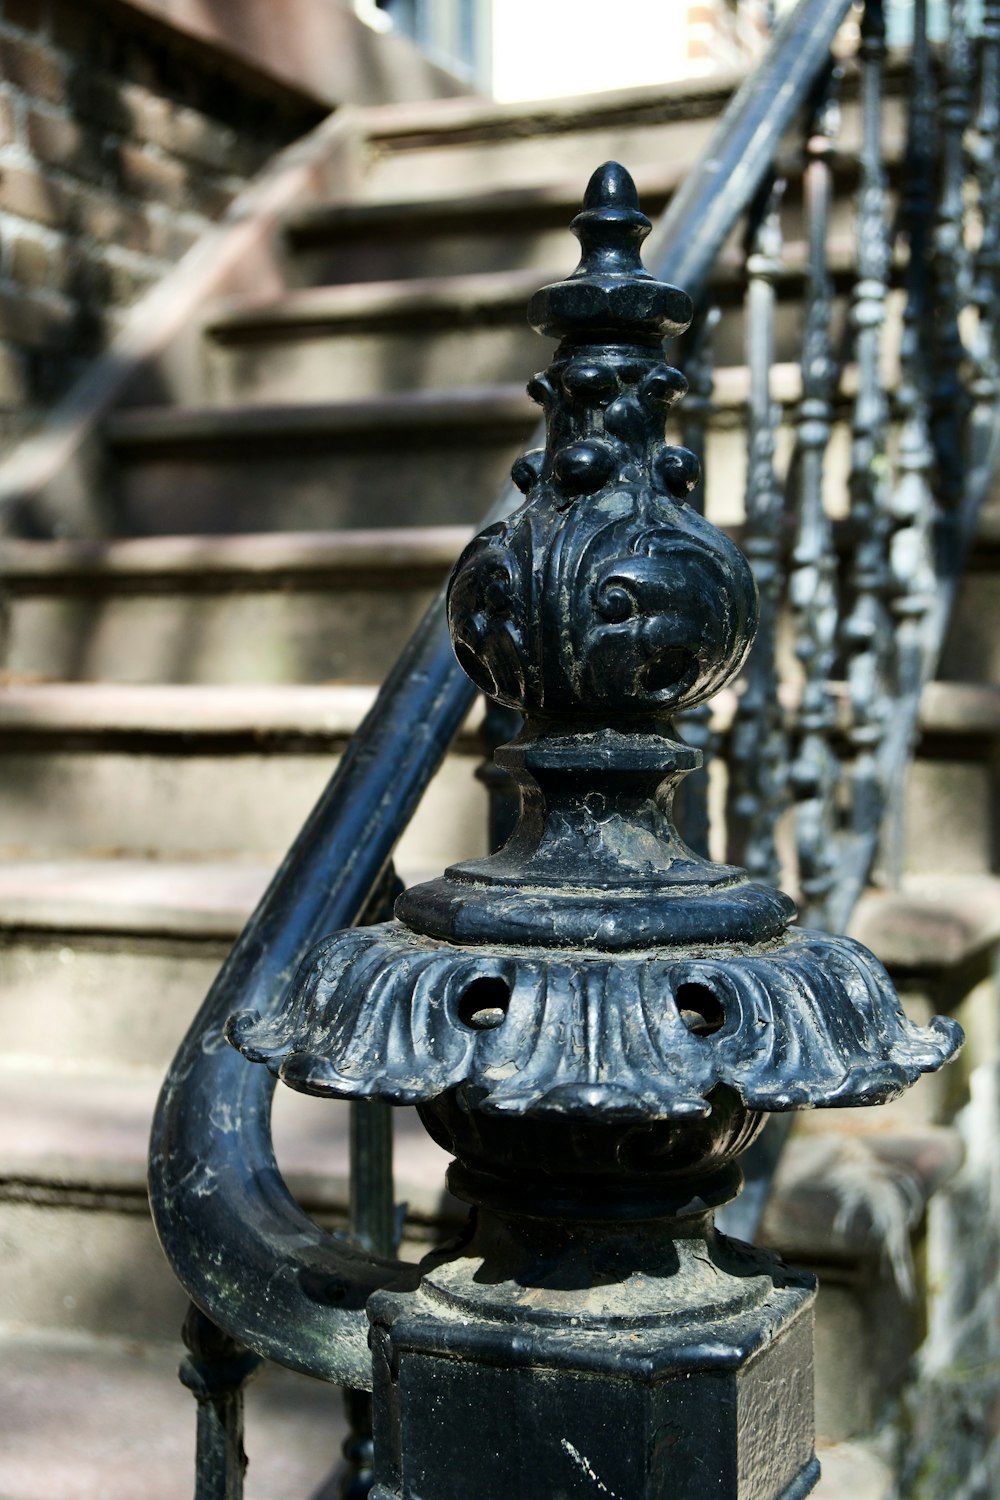 a wrought iron railing on a staircase in a city